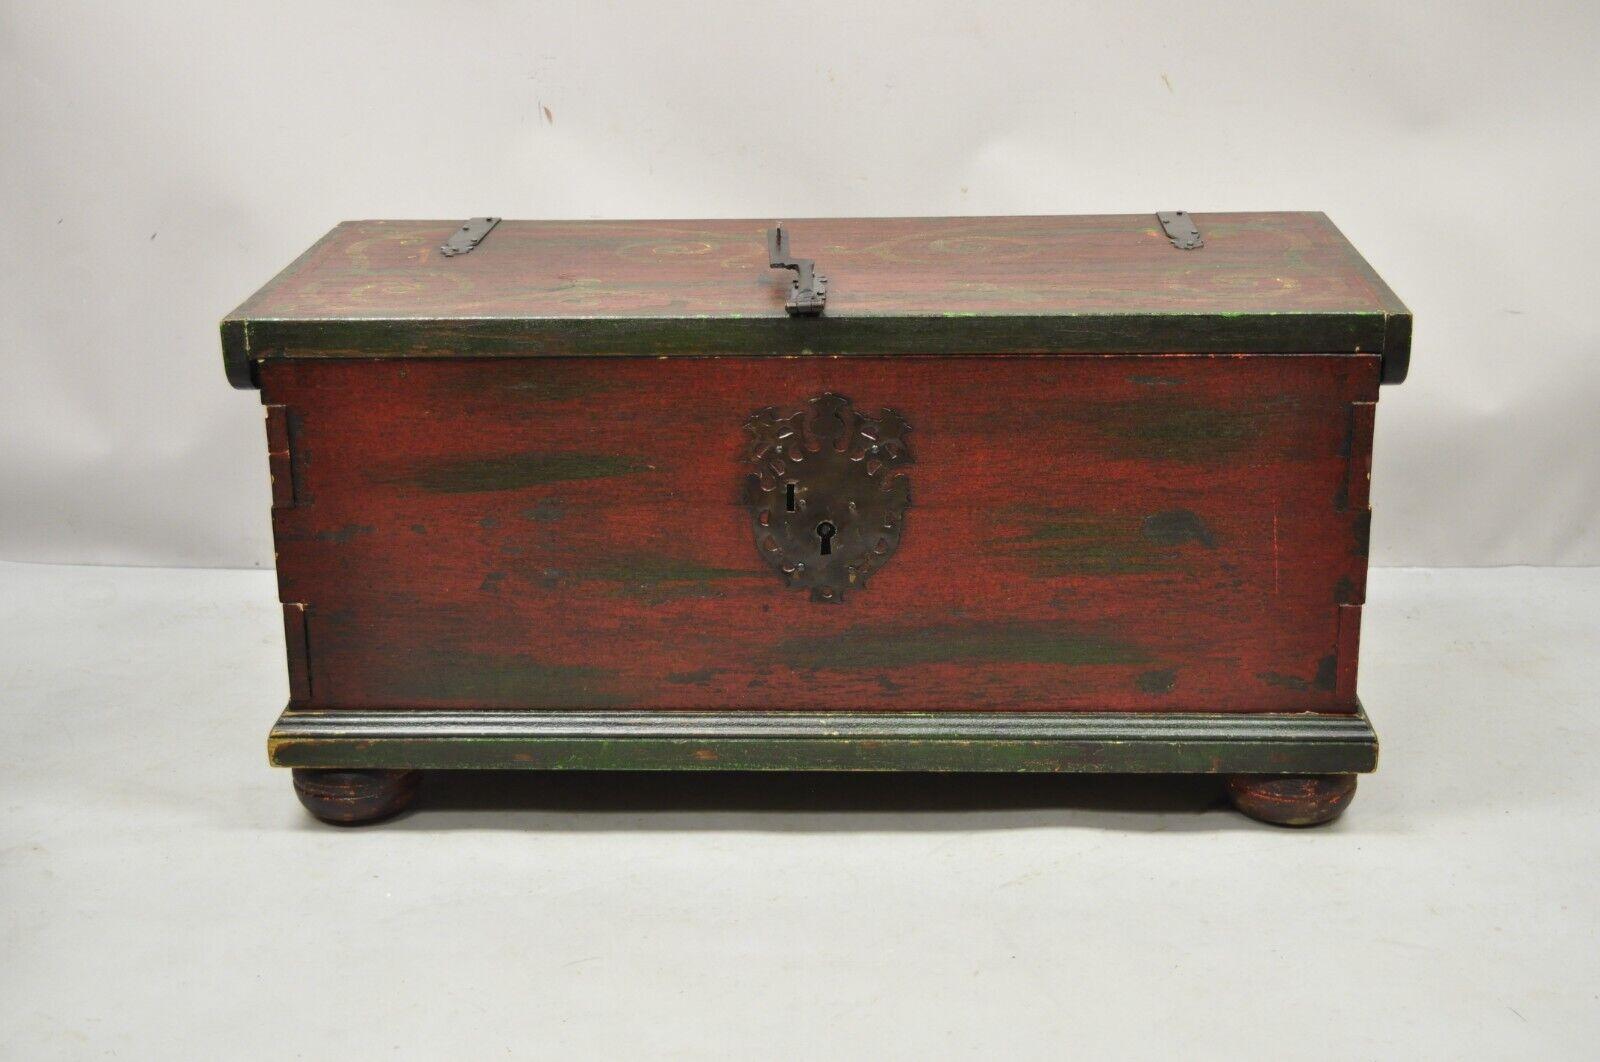 Vintage wooden blanket chest trunk French country style red green paint. Item features bun feet, green and red distress painted finish, dovetail joints, solid wood construction, original label, very nice vintage item. Circa mid to late 20th century.